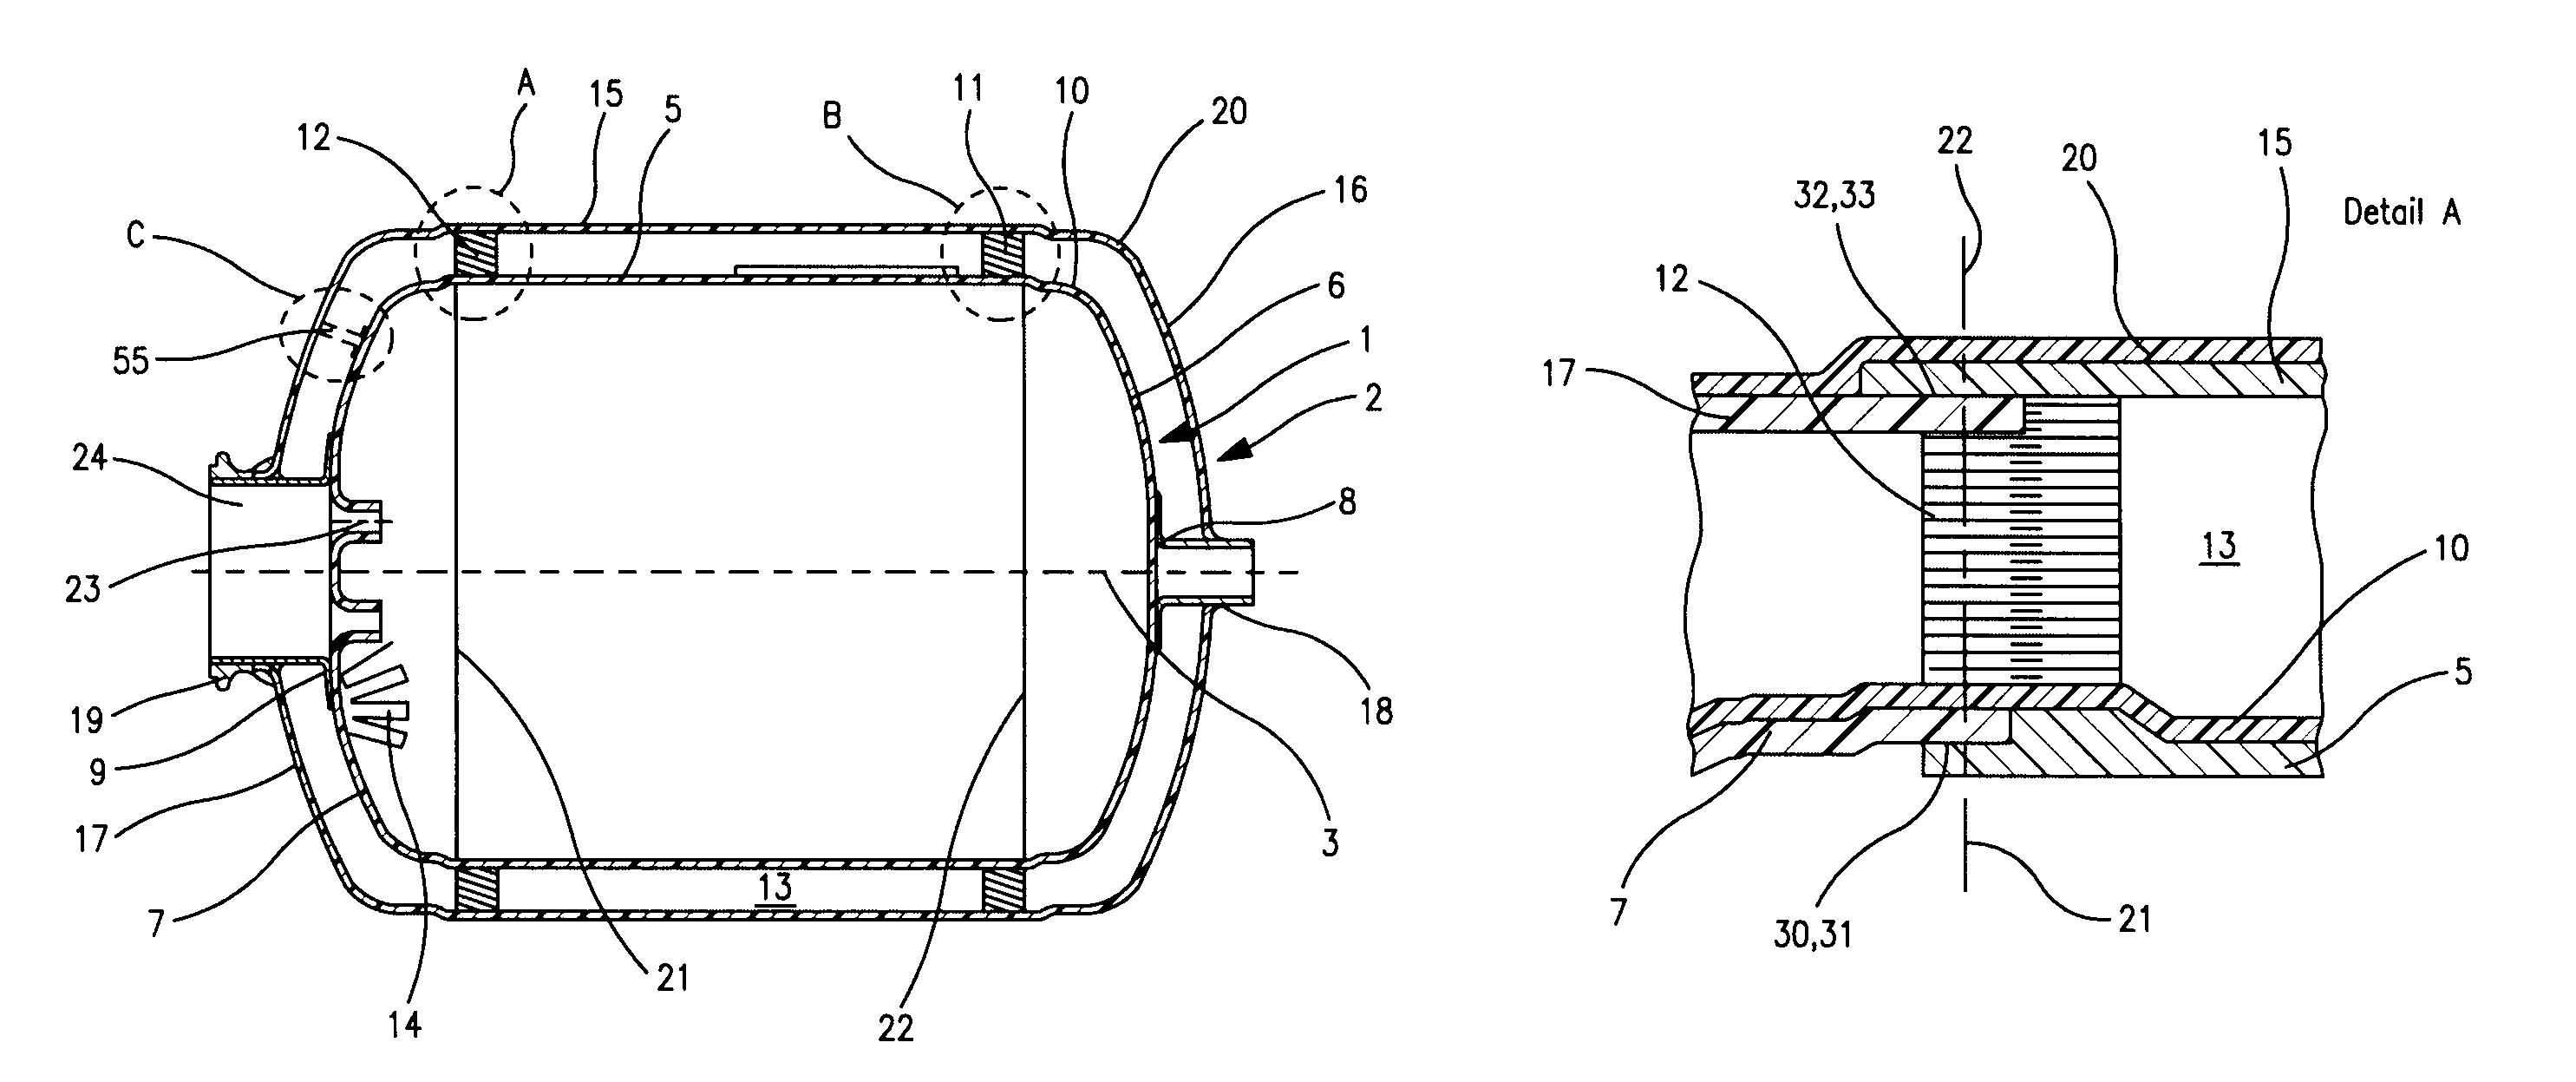 Double-walled container having supports for positioning the inner and outer walls